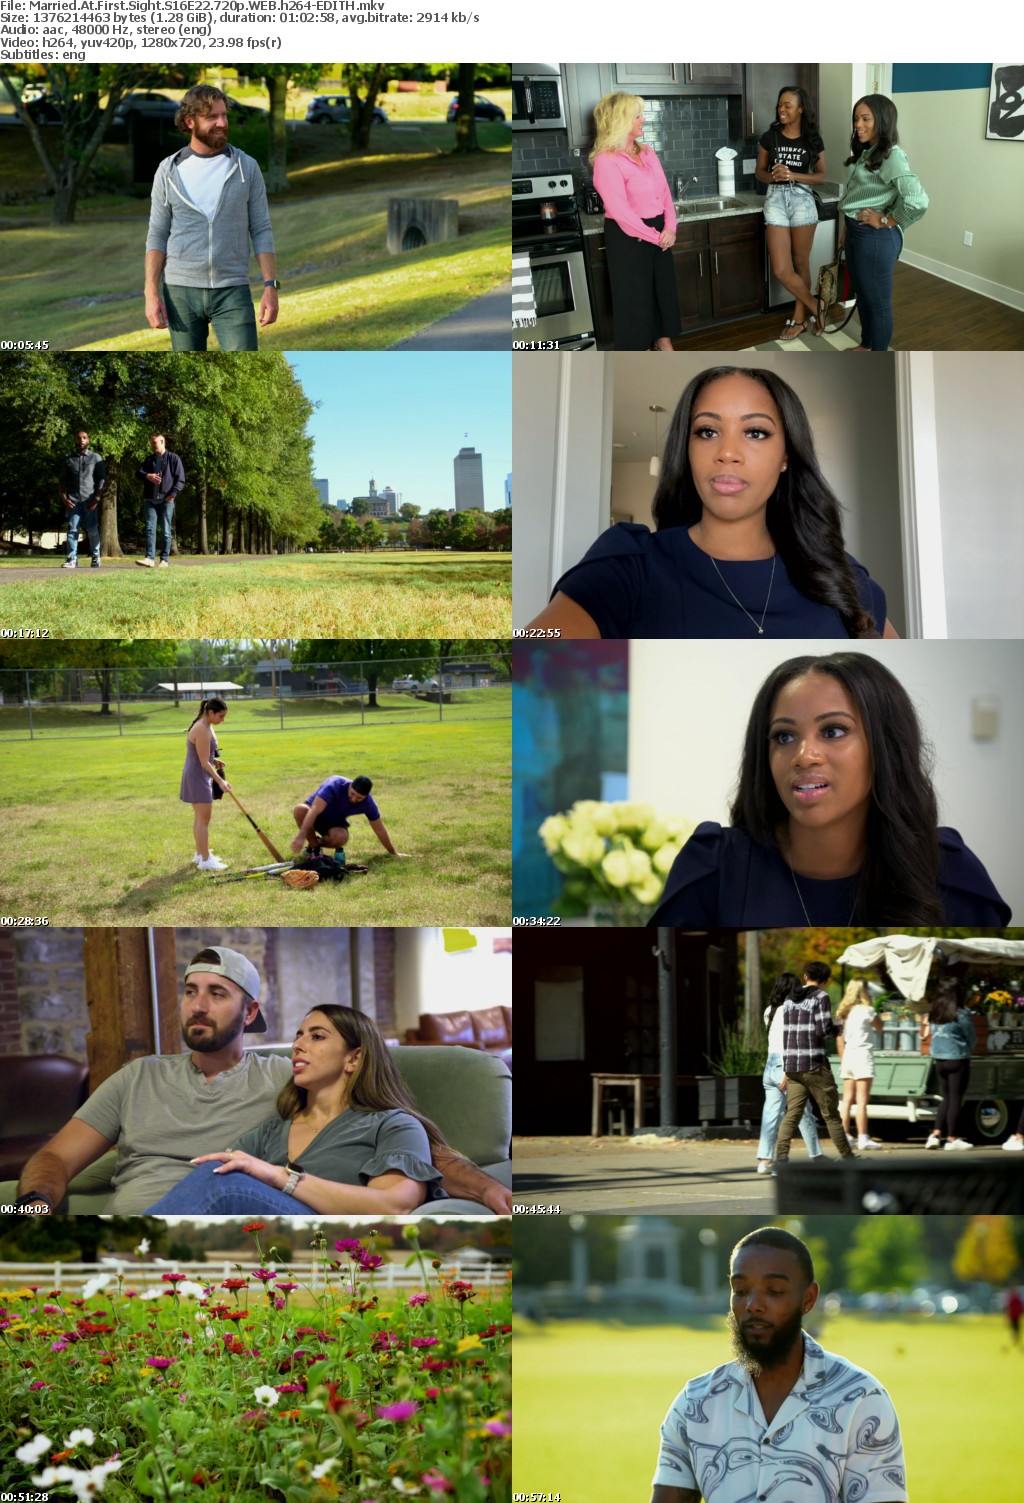 Married At First Sight S16E22 720p WEB h264-EDITH